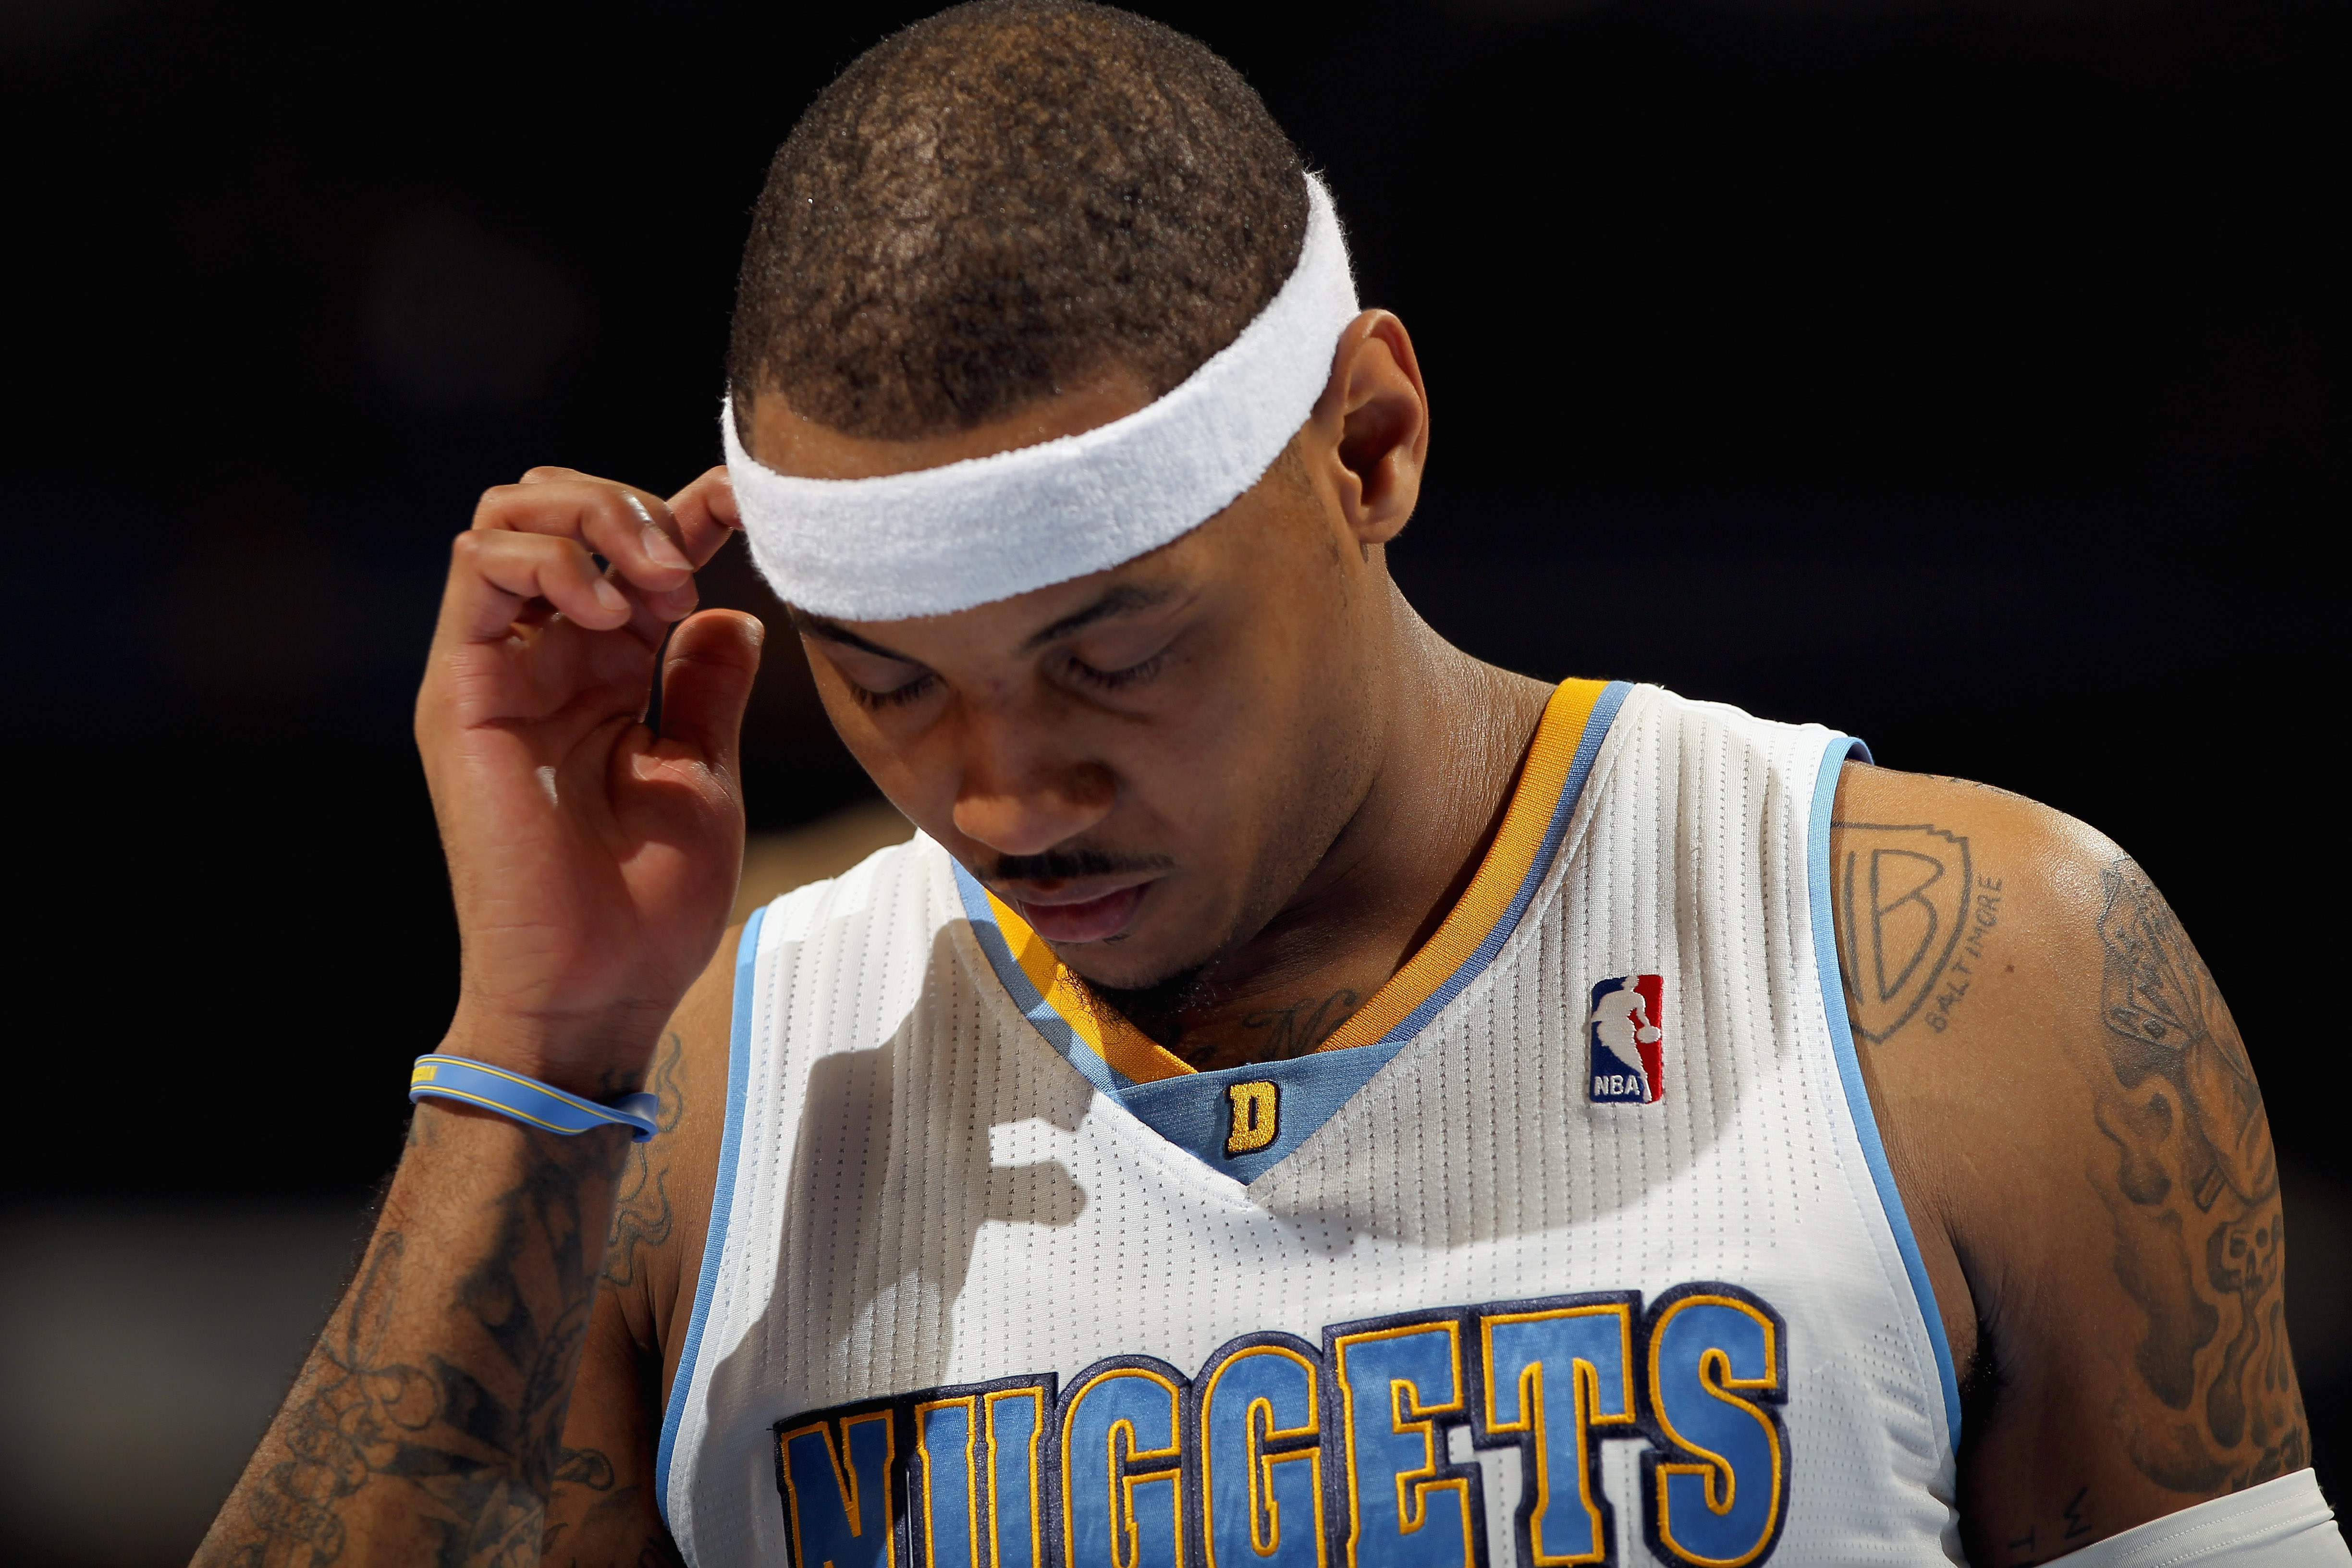 DENVER, CO - FEBRUARY 10:  Carmelo Anthony #15 of the Denver Nuggets looks on during a break in the action against the Dallas Mavericks during NBA action at the Pepsi Center on February 10, 2011 in Denver, Colorado. The Nuggets defeated the Mavericks 121-